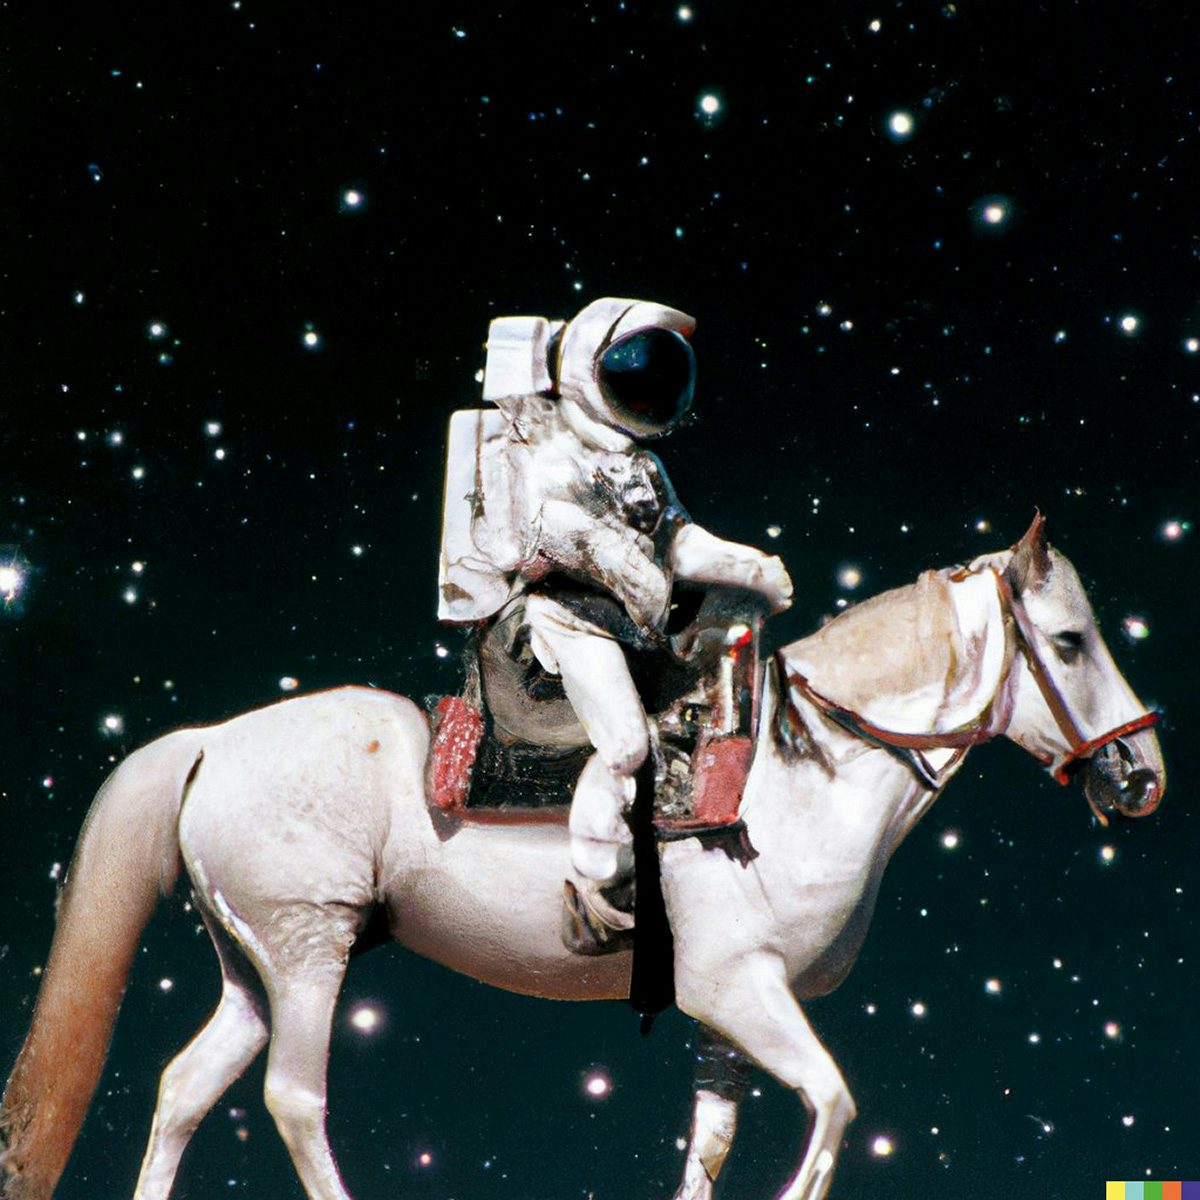 AI generated image appaering to show an astronaut riding on the back of a white horse against a starry sky